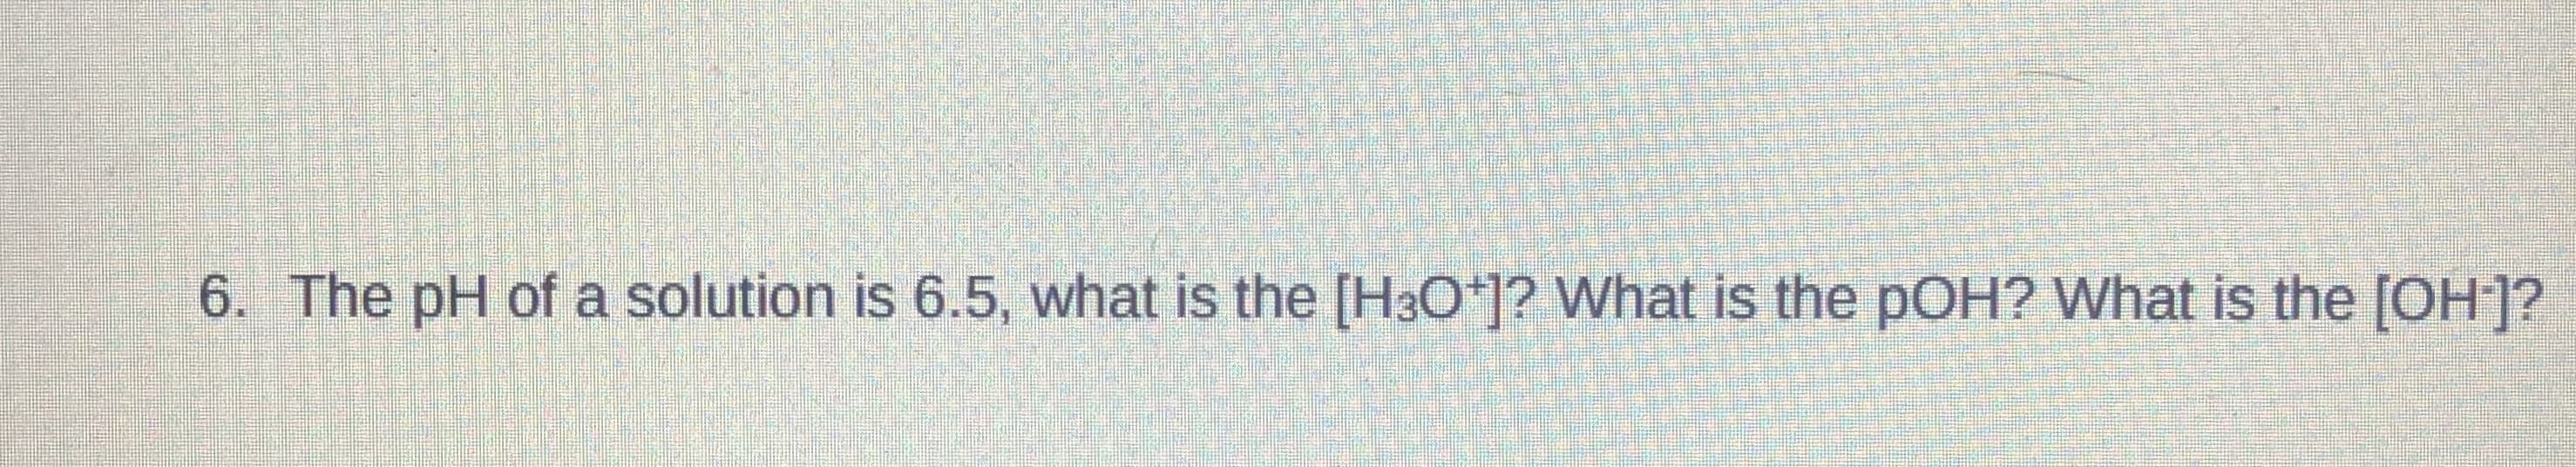 6. The pH of a solution is 6.5, what is the [H3O*]? What is the pOH? What is the [OH]?
